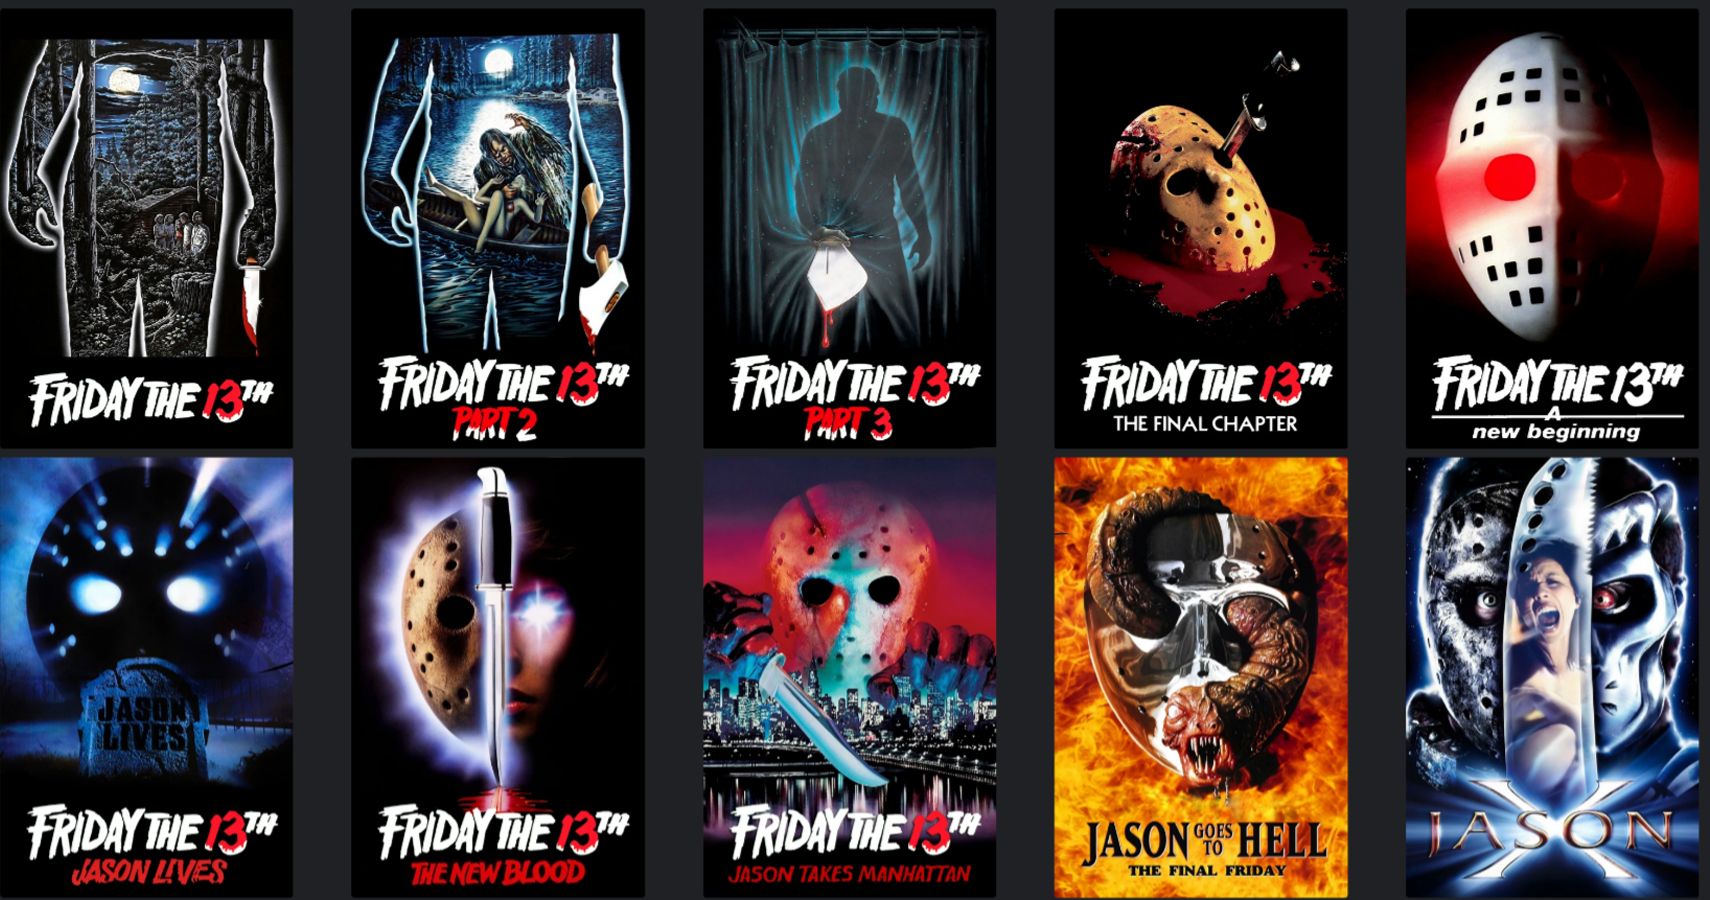 Every Friday The 13th Movie (& Where You Can Watch Them Online)